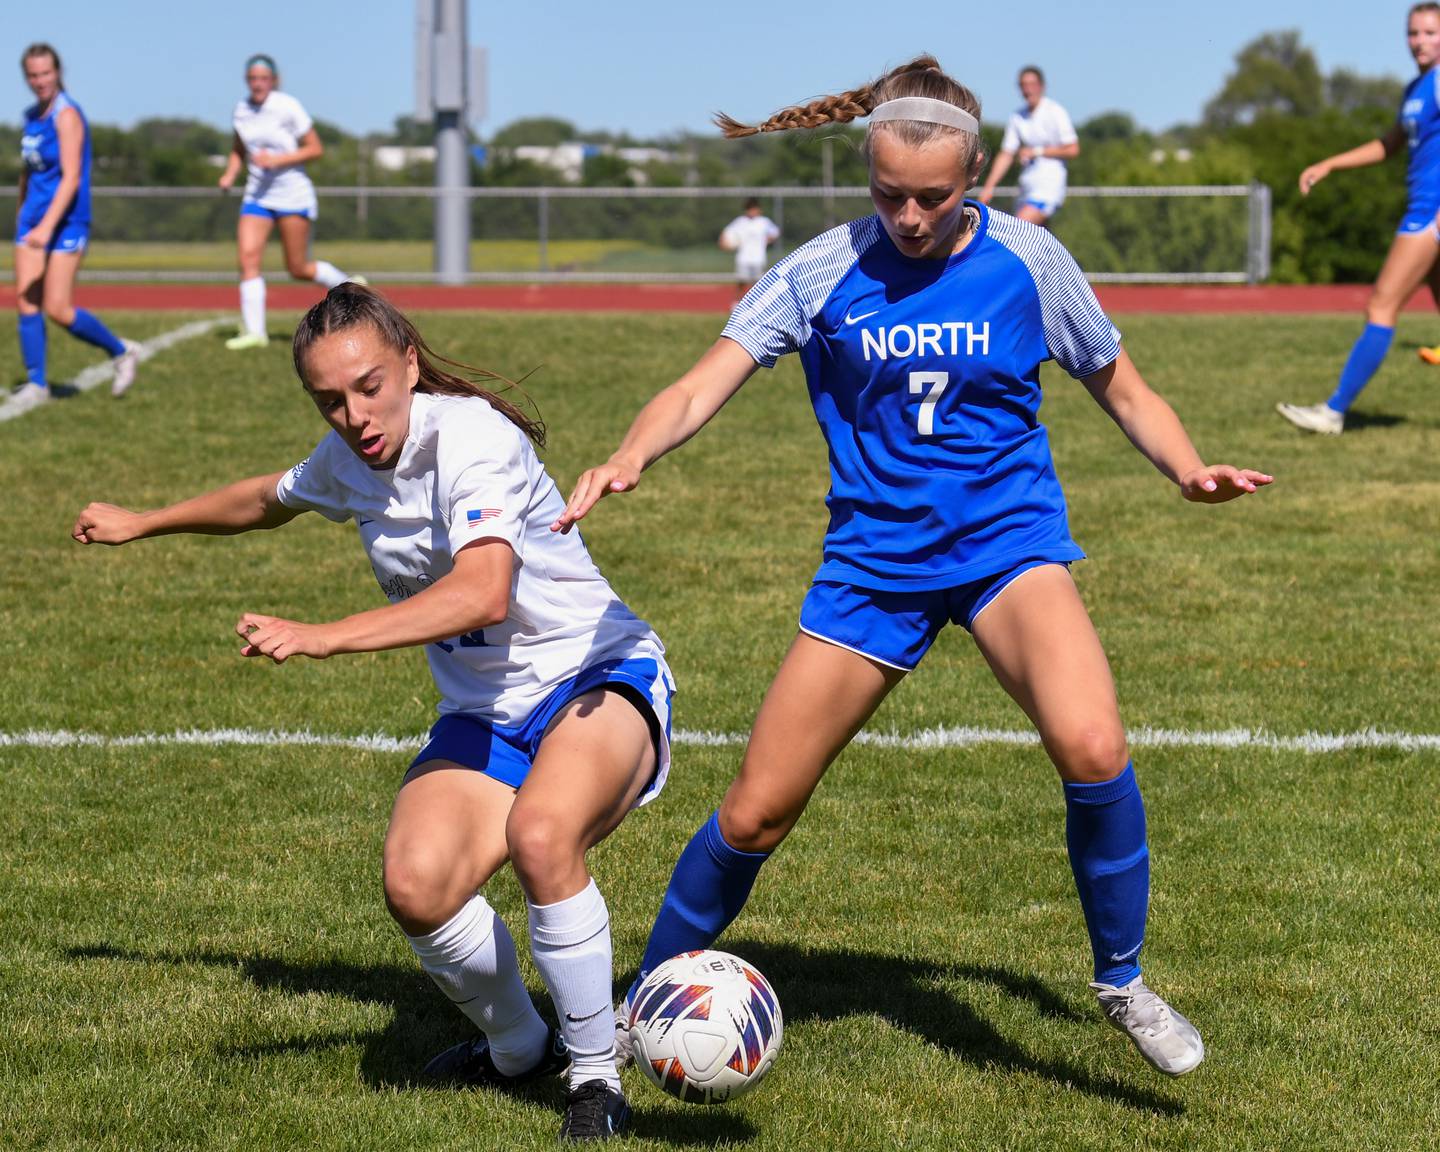 St. Charles North's Laney Stark (19) and Wheaton North's Caoah Strong (7) battle for the ball during the sectional title game held at South Elgin High School on Saturday May 25, 2024.